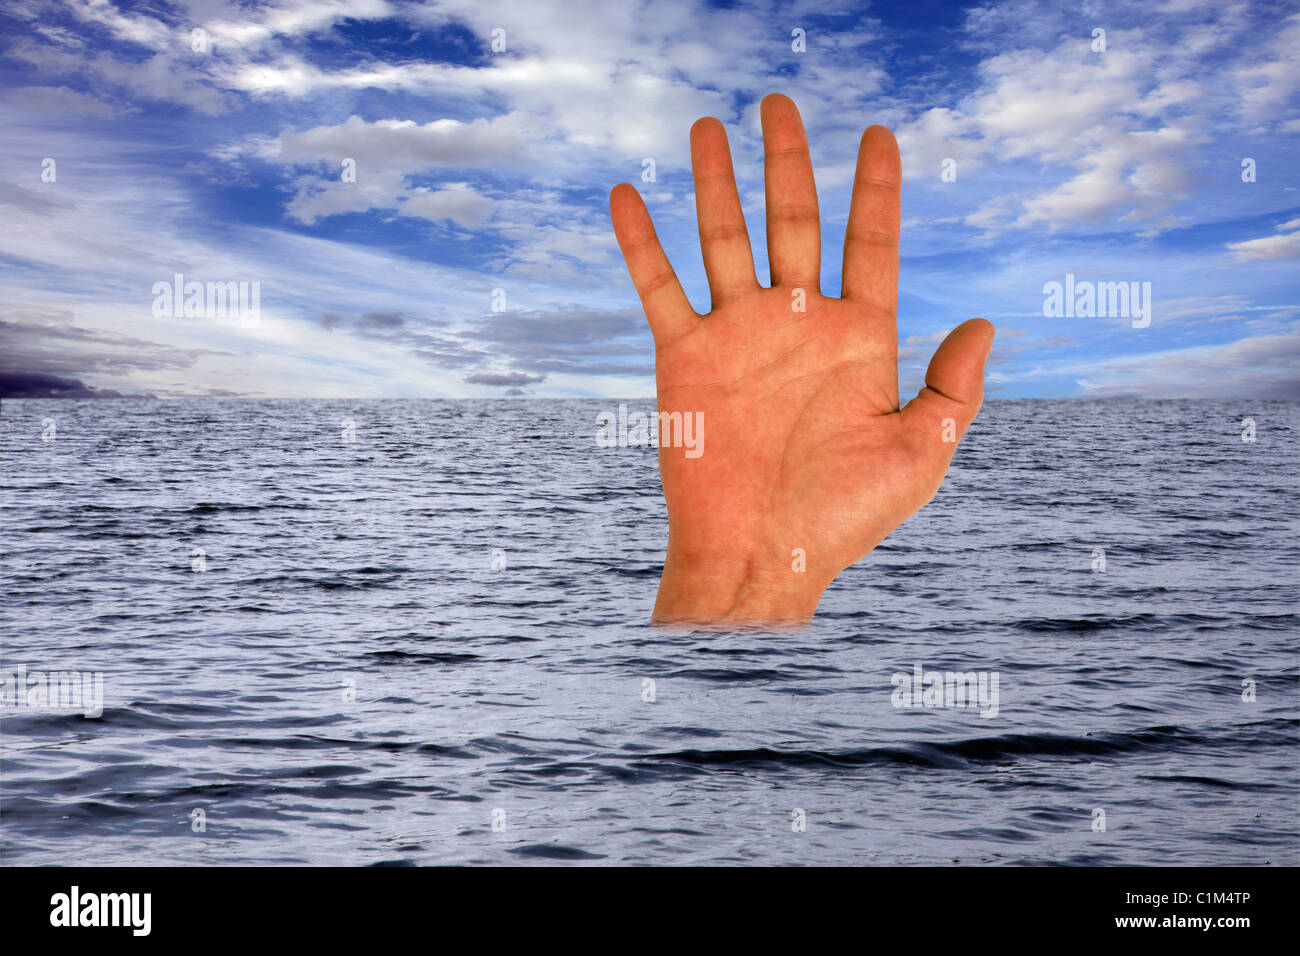 Hand of a drowning man reaching for help. Stock Photo